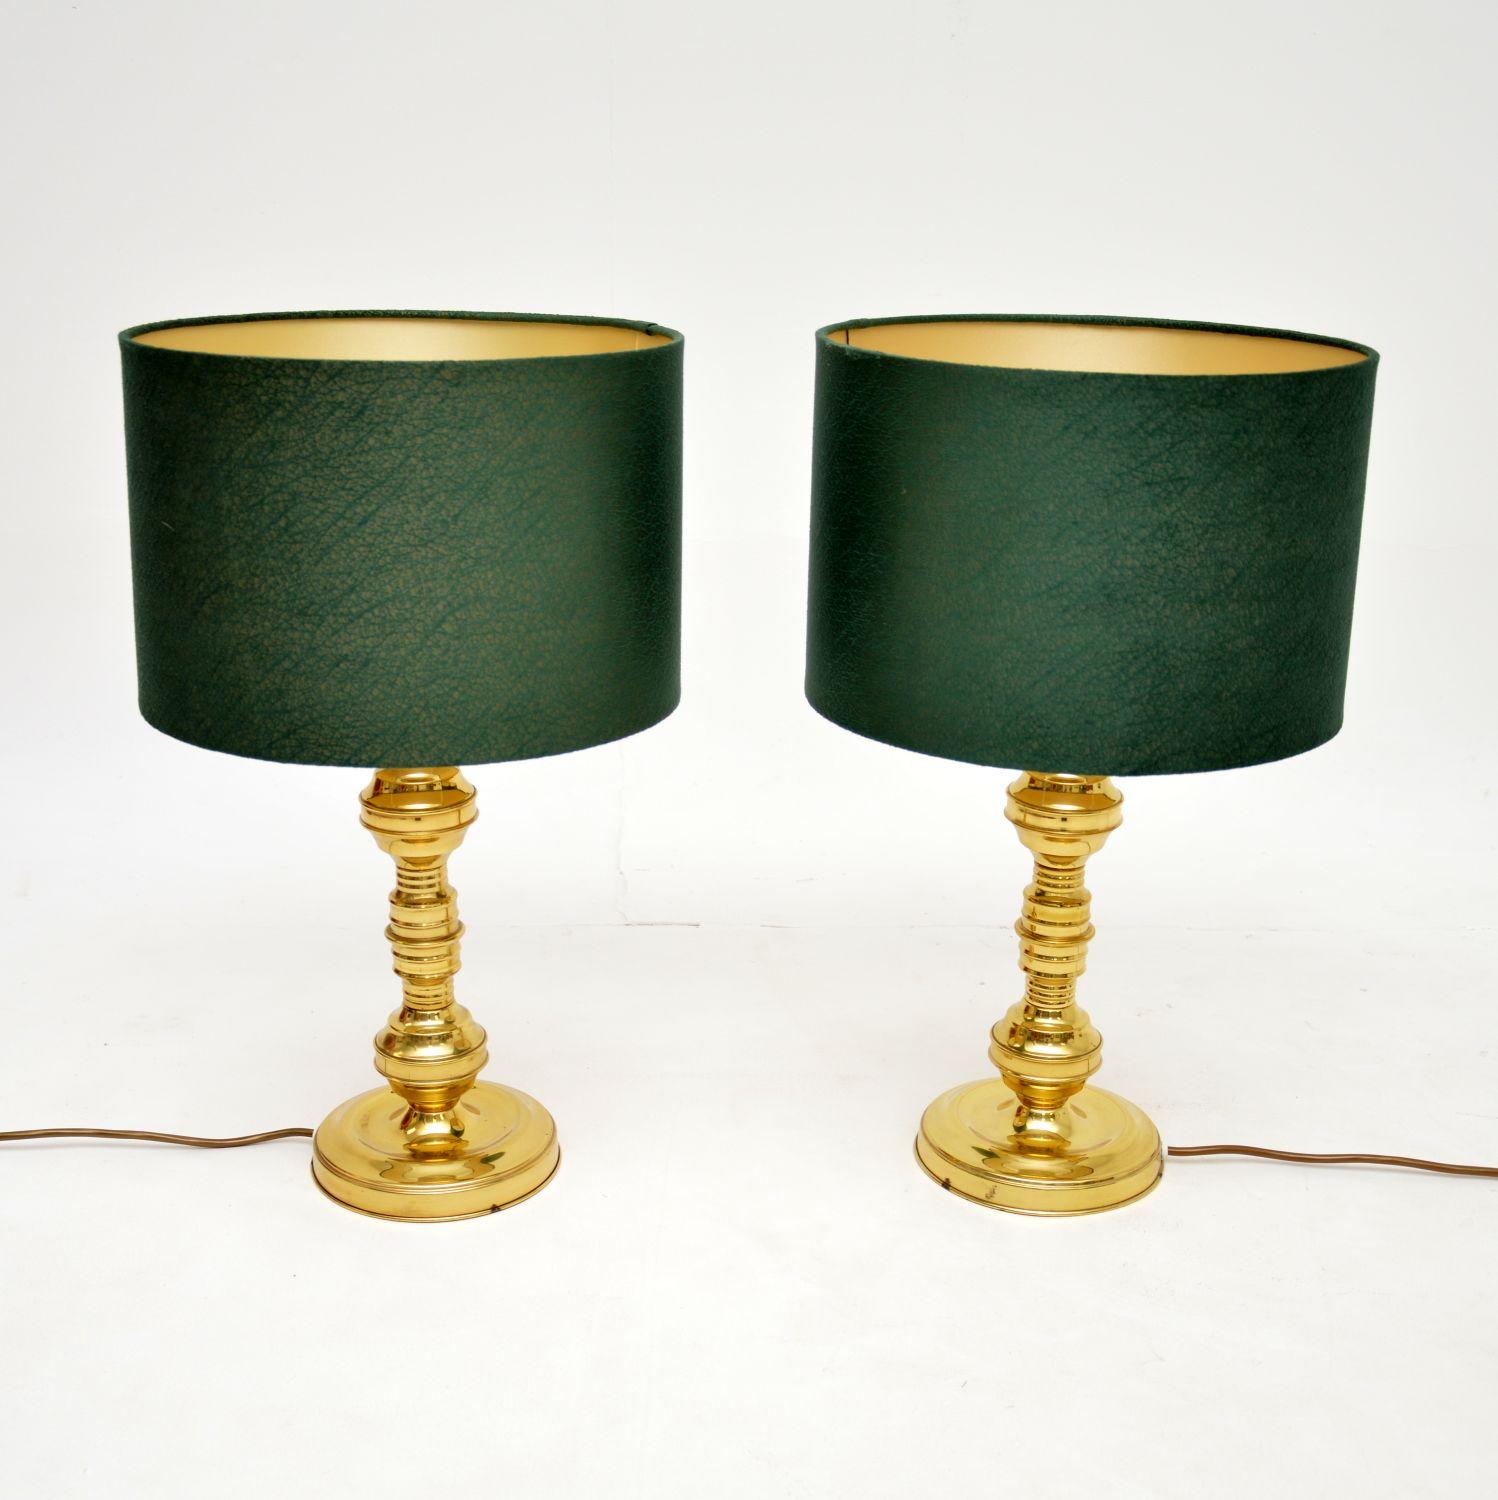 A very stylish pair of vintage table lamps in brass. They were made in England, and they date from the 1970’s.

The quality is excellent, these are a lovely size and have been paired with modern green velvet shades.

We have had these re-wired, they